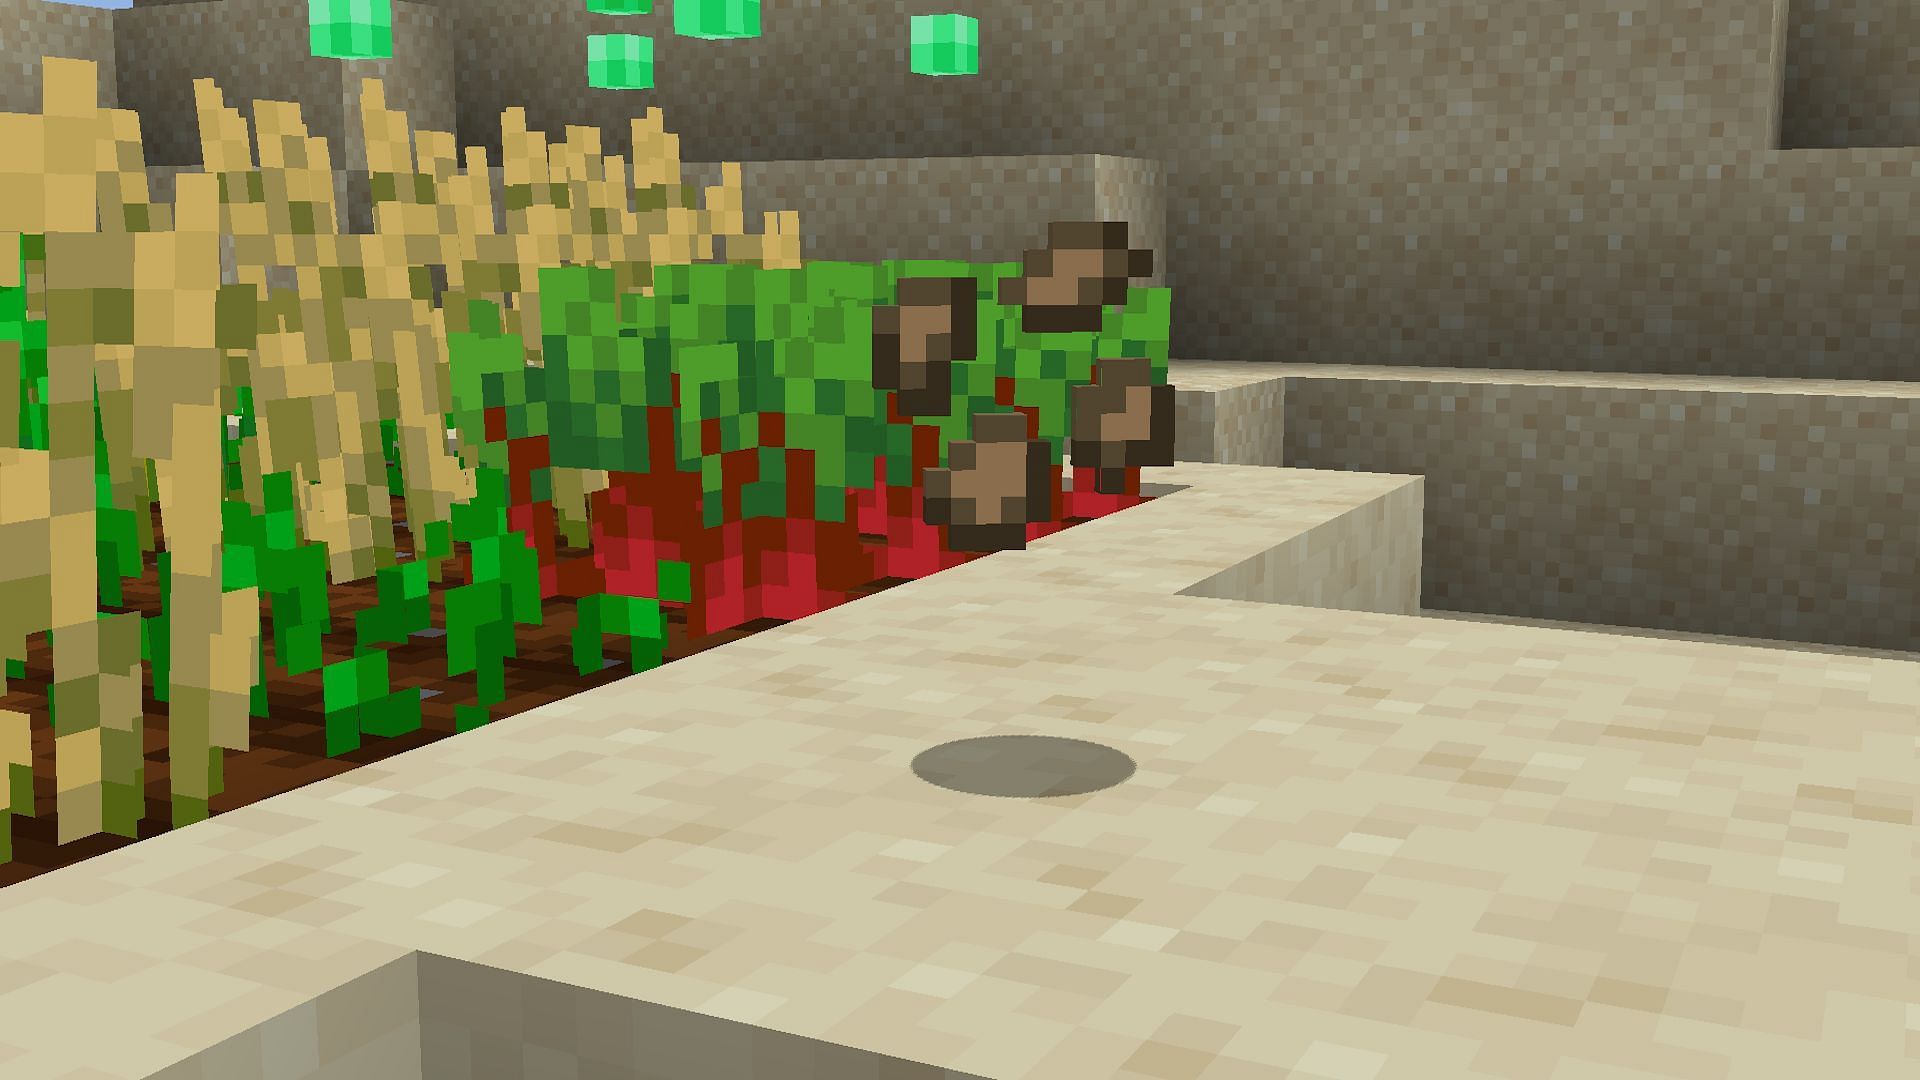 Beetroot seeds in Minecraft are a useful item to track down early for farming (Image via Mojang)